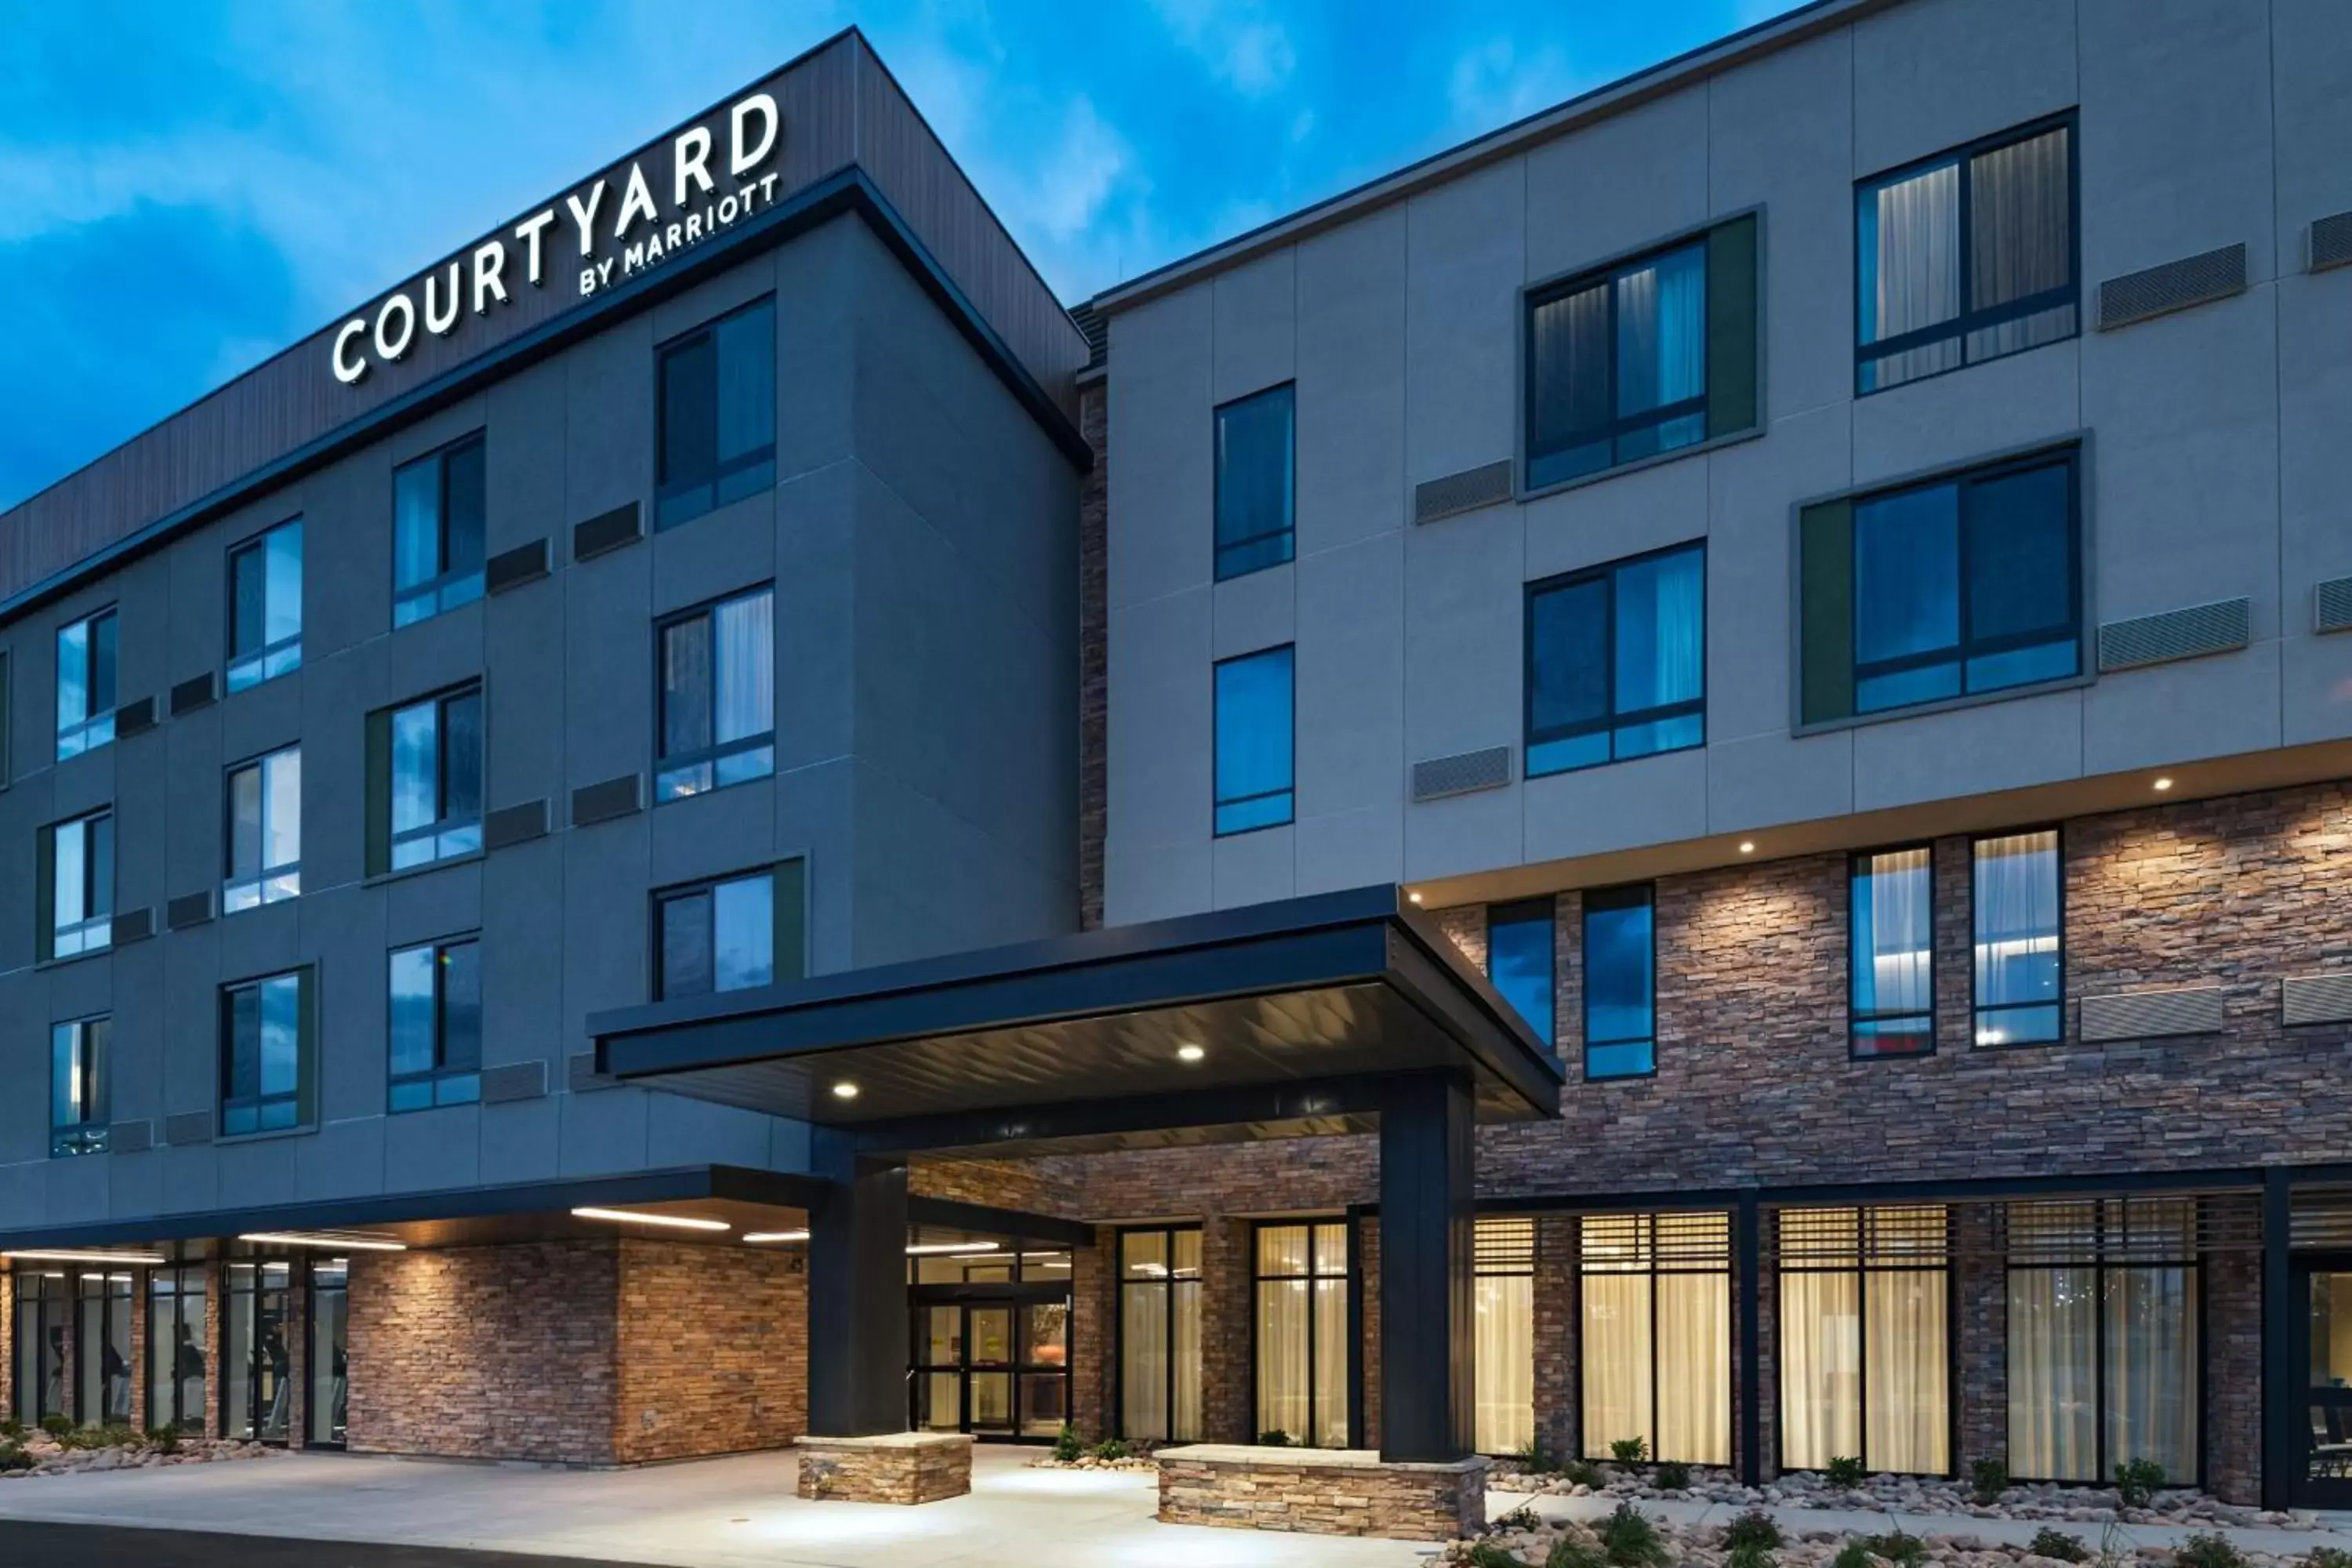 Property Building in Courtyard by Marriott Colorado Springs North, Air Force Academy